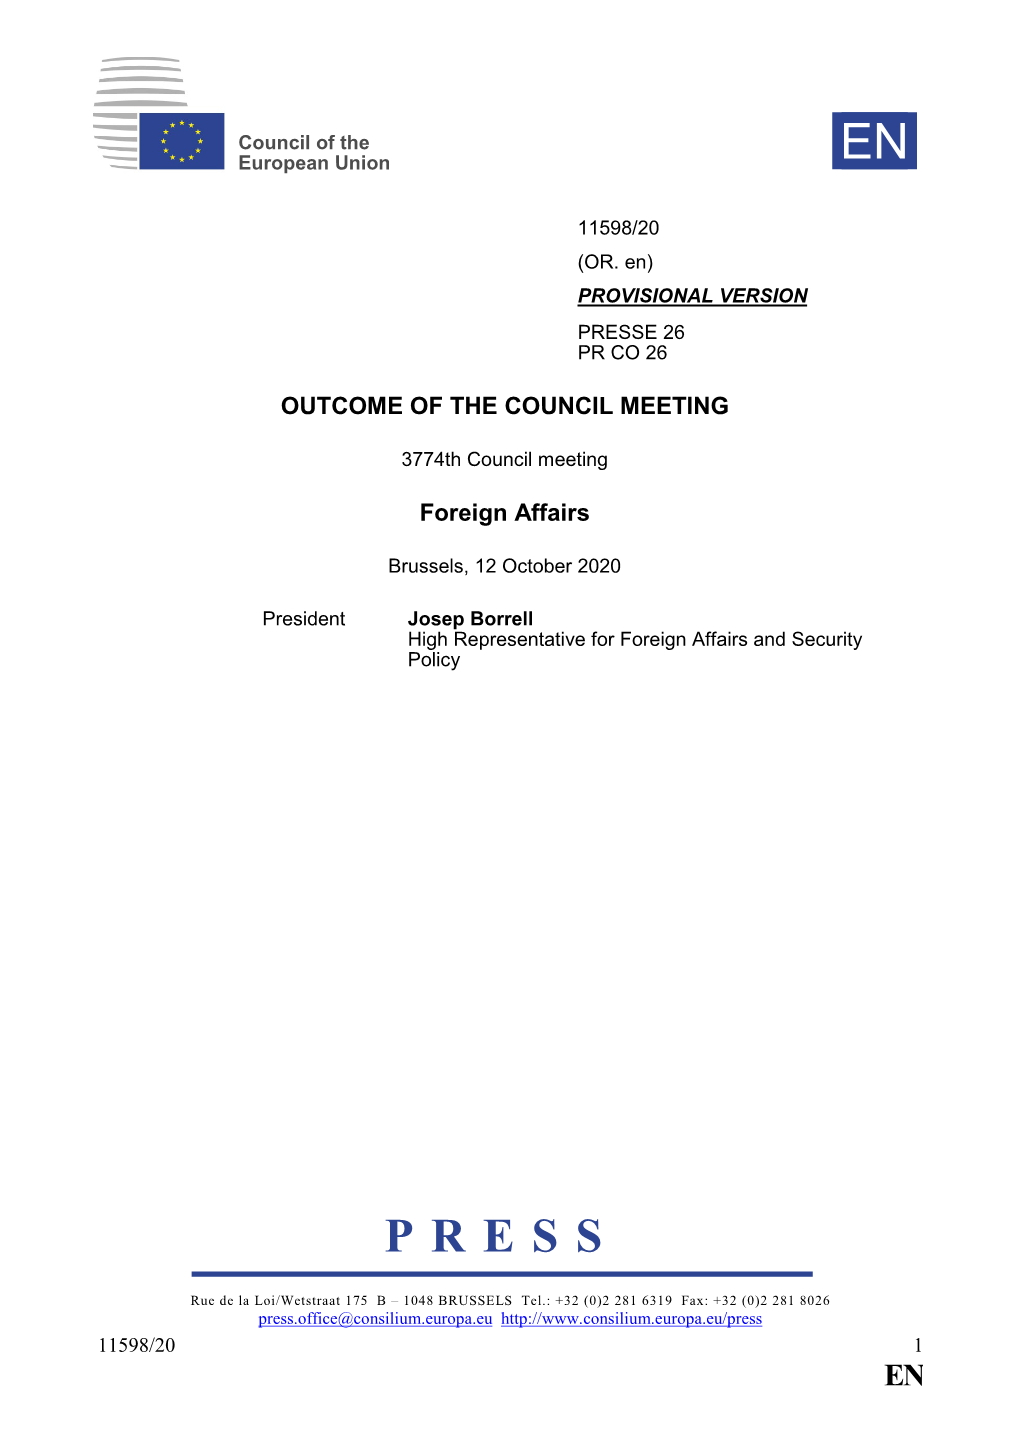 OUTCOME of the COUNCIL MEETING Foreign Affairs